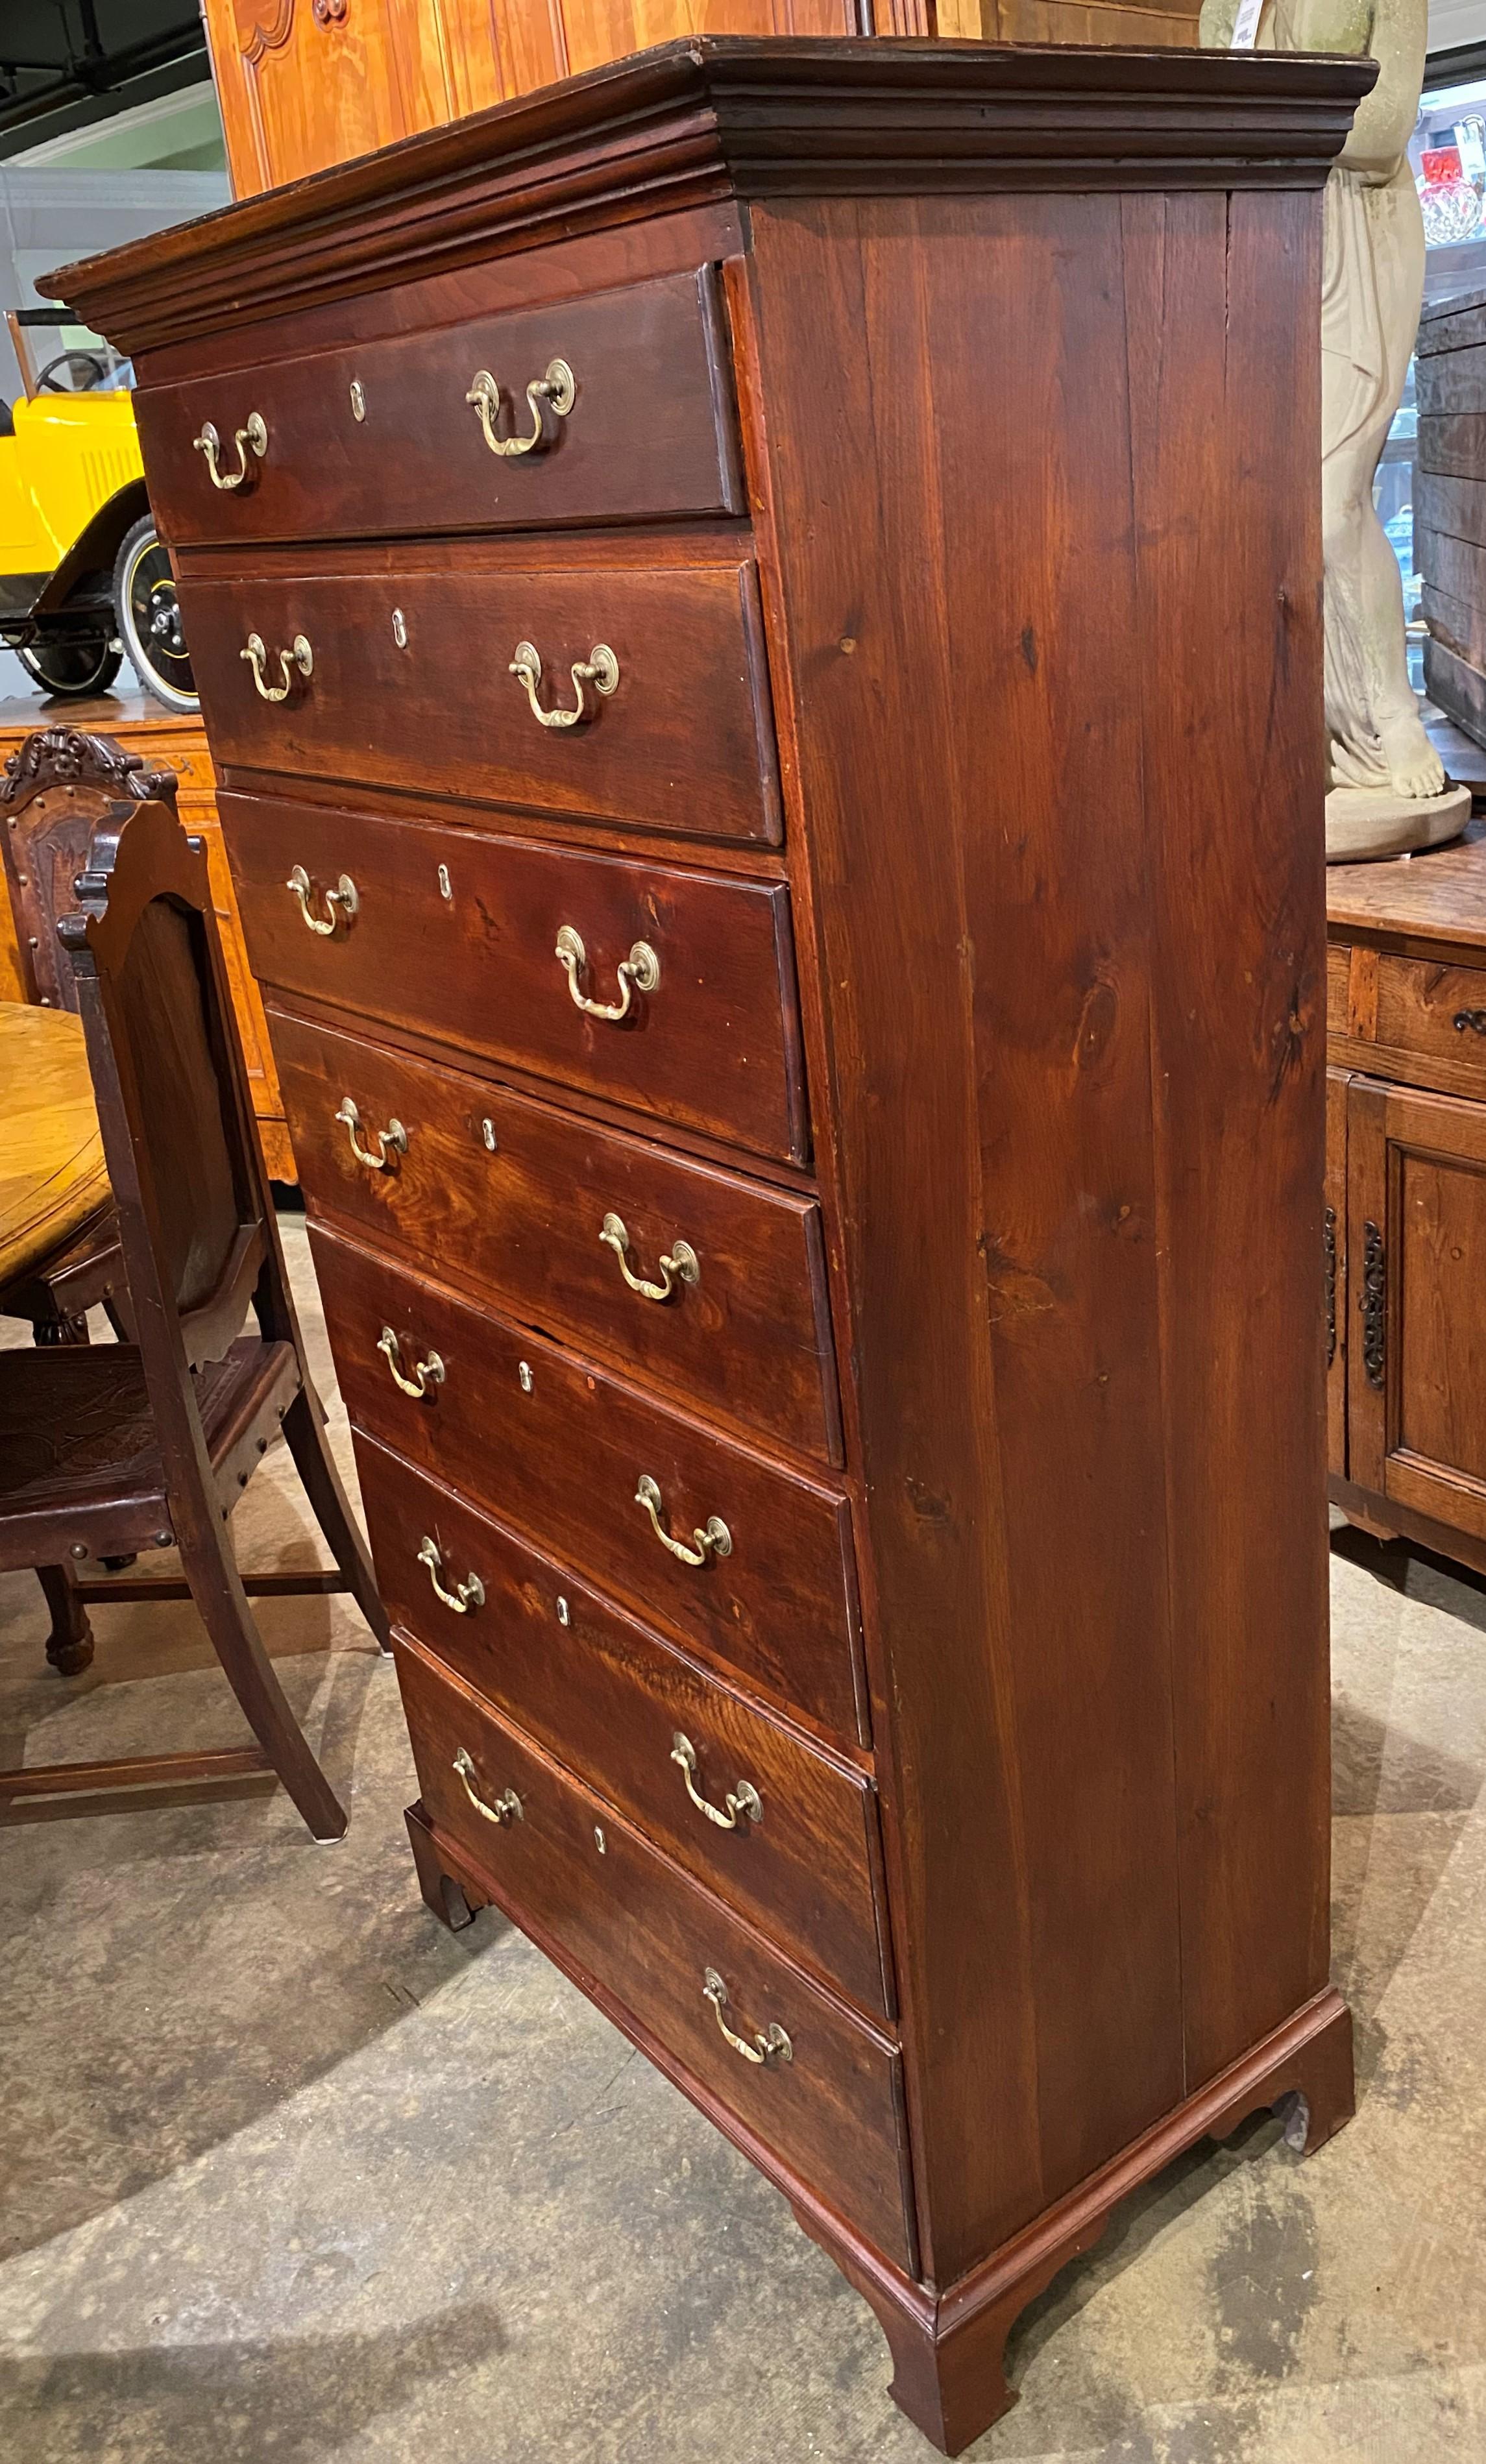 A nicely made hand carved walnut Chippendale style tall chest with most of its original color finish intact, with molded cornice surmounting seven graduated long drawers, each with replaced brasses, and original wide board back, all supported with a